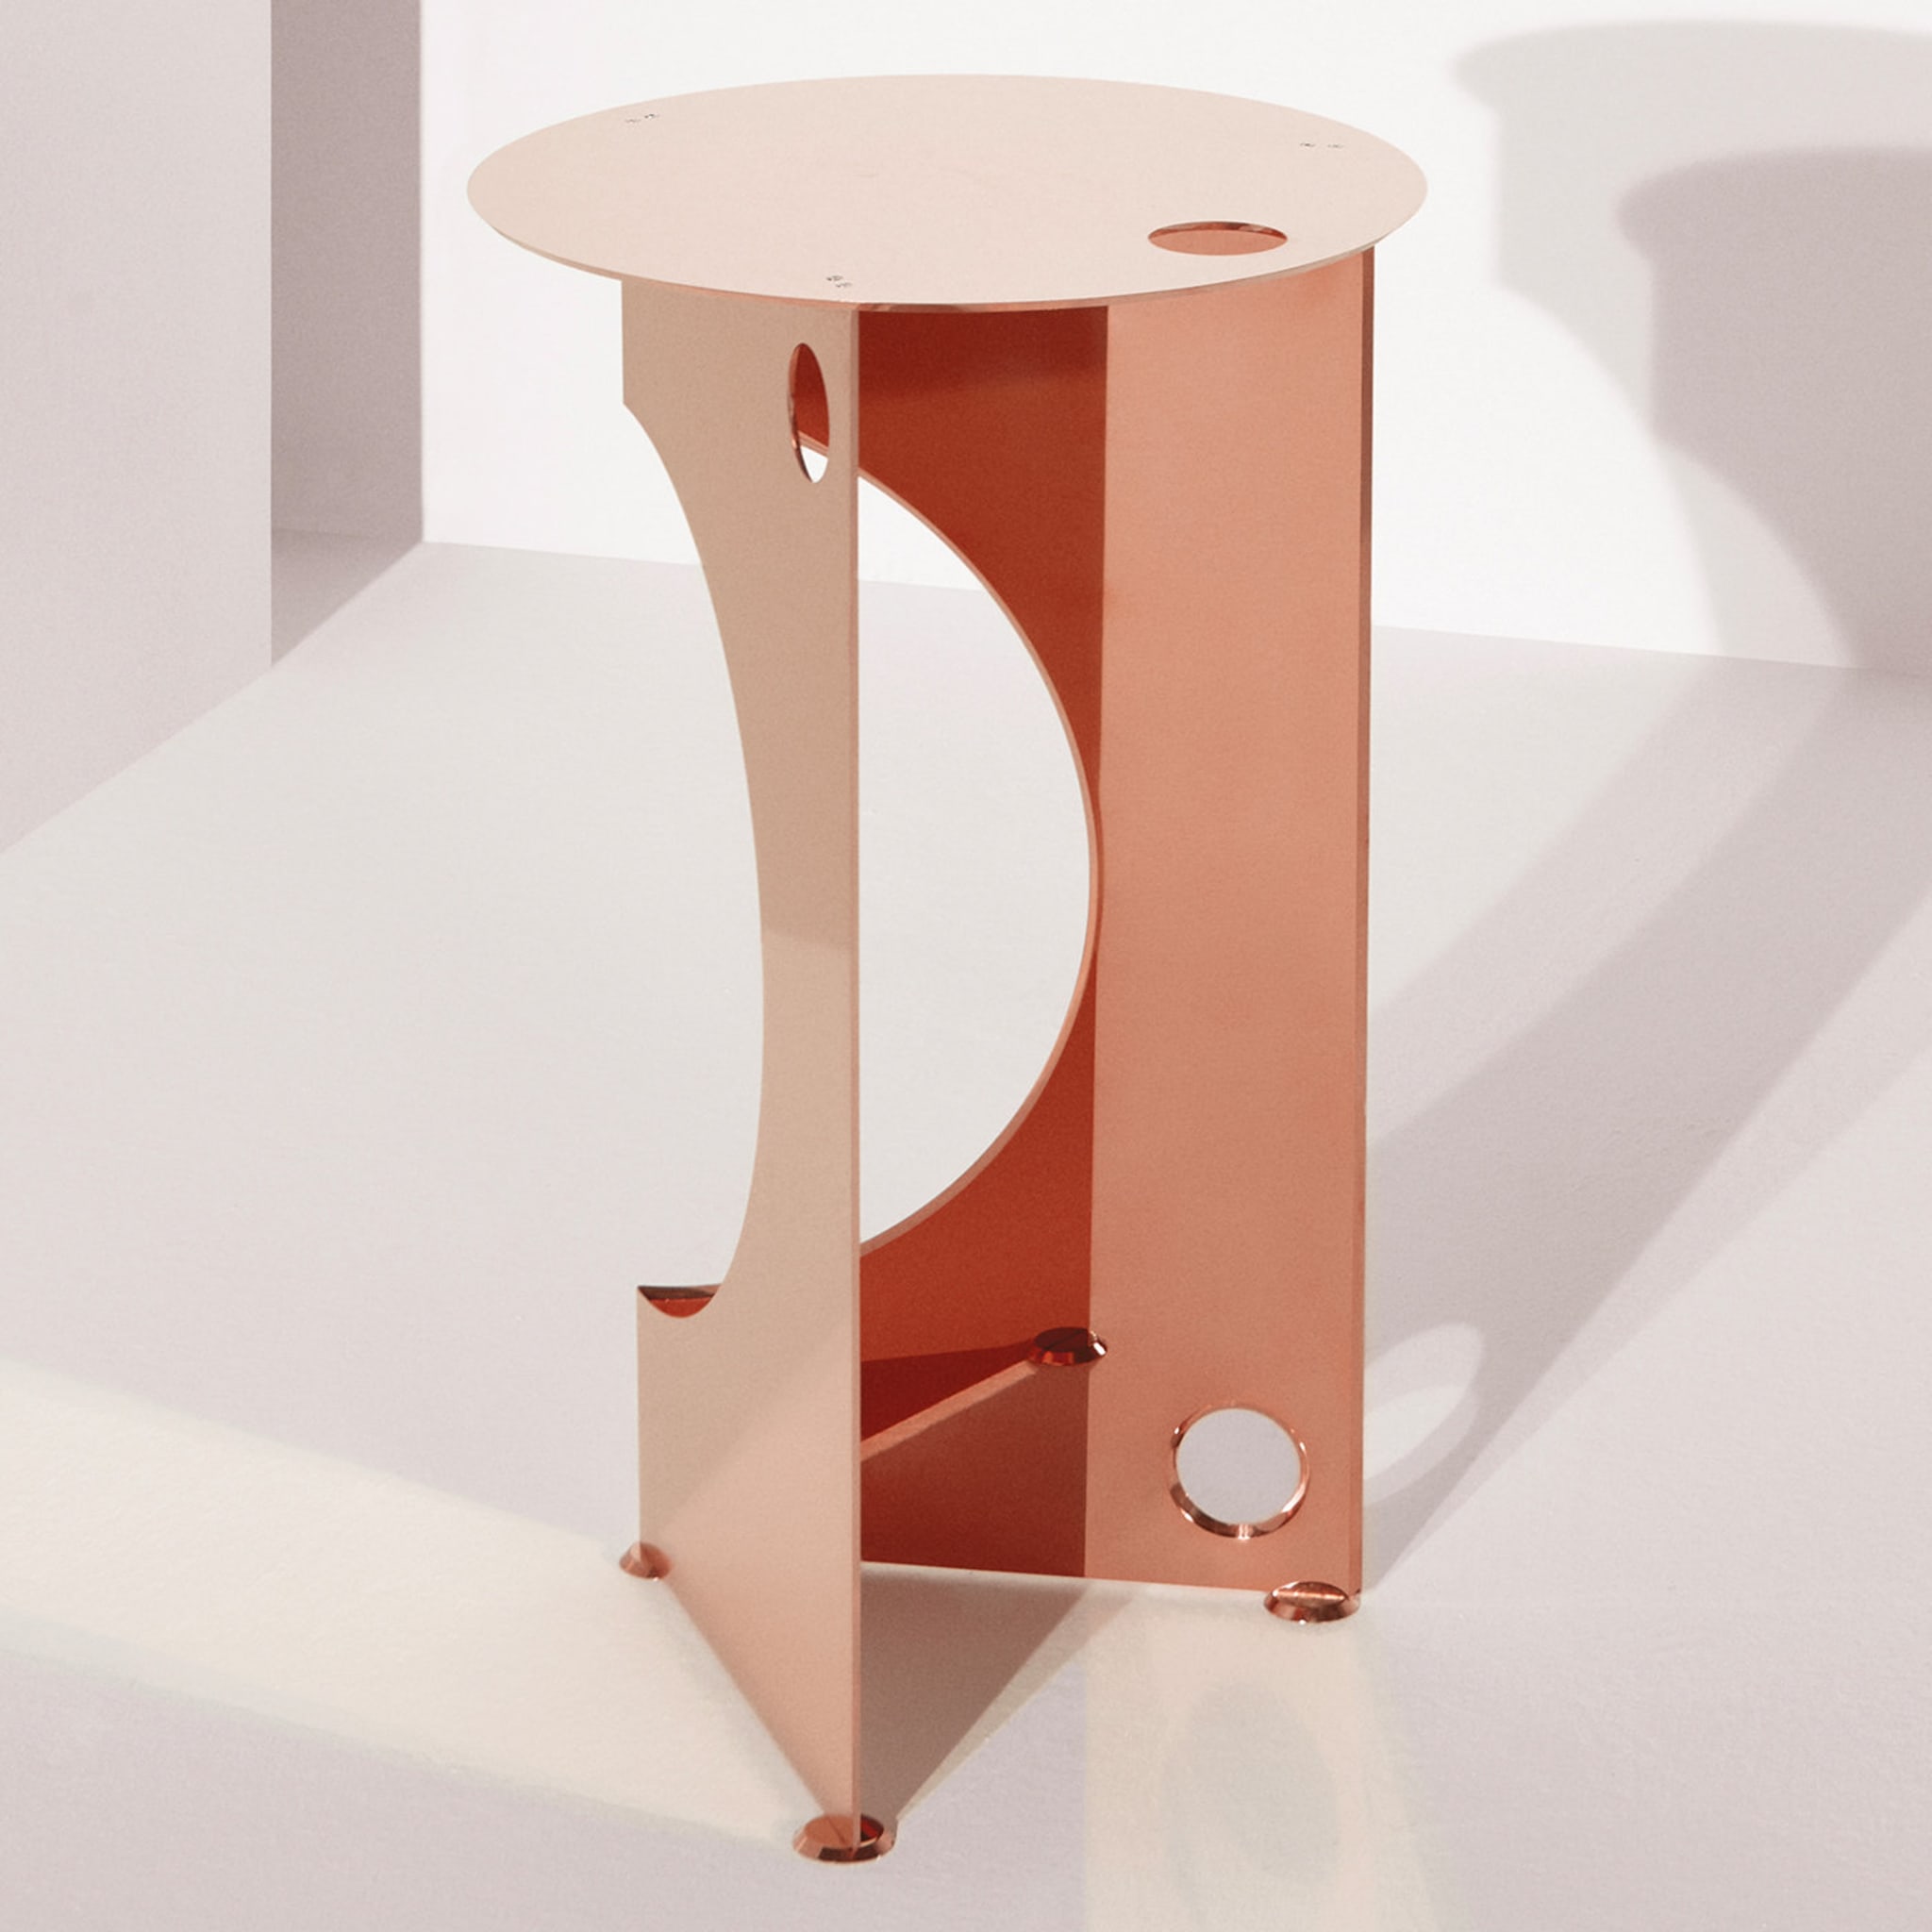 One Side Table in Copper - Alternative view 1